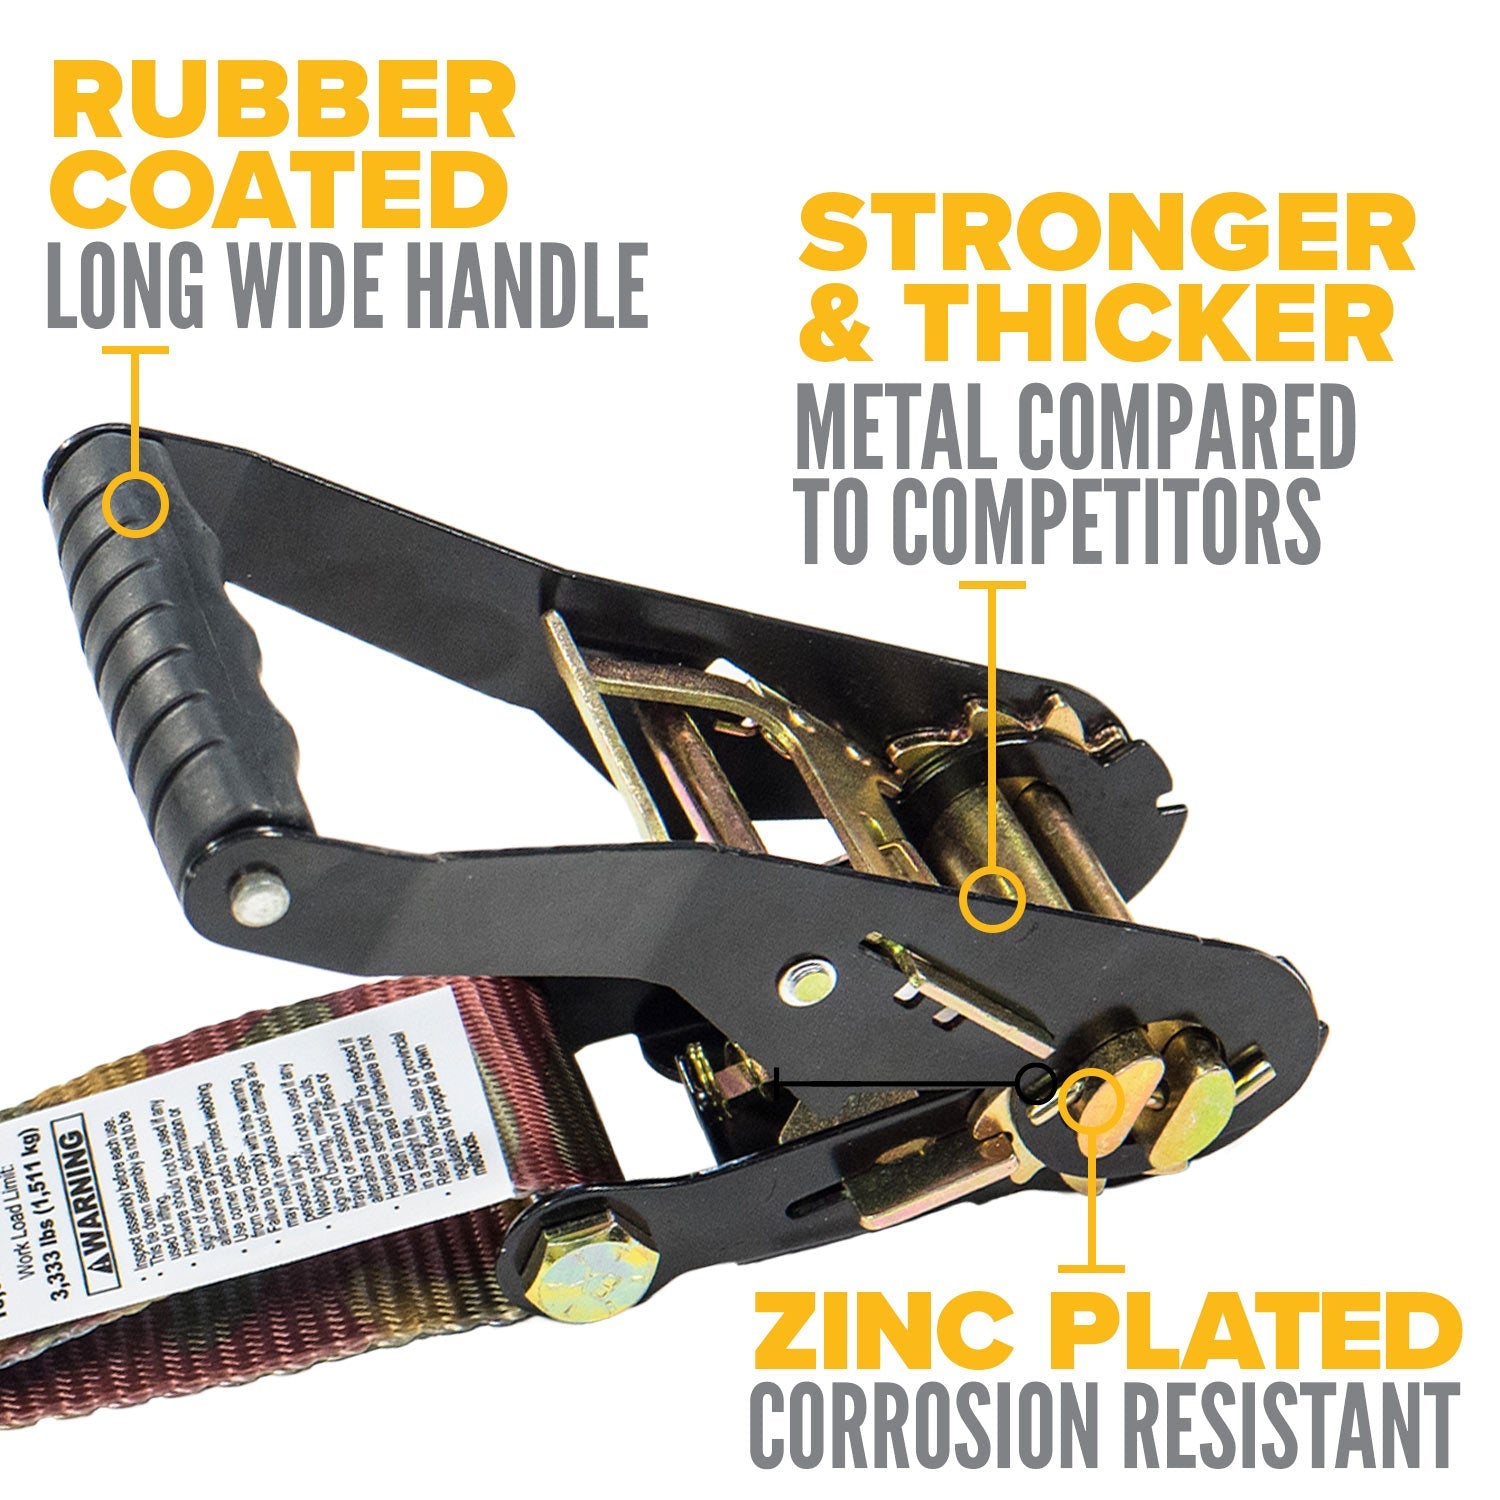 27' ratchet strap -  2" ratchet is strong and corrosion resistant